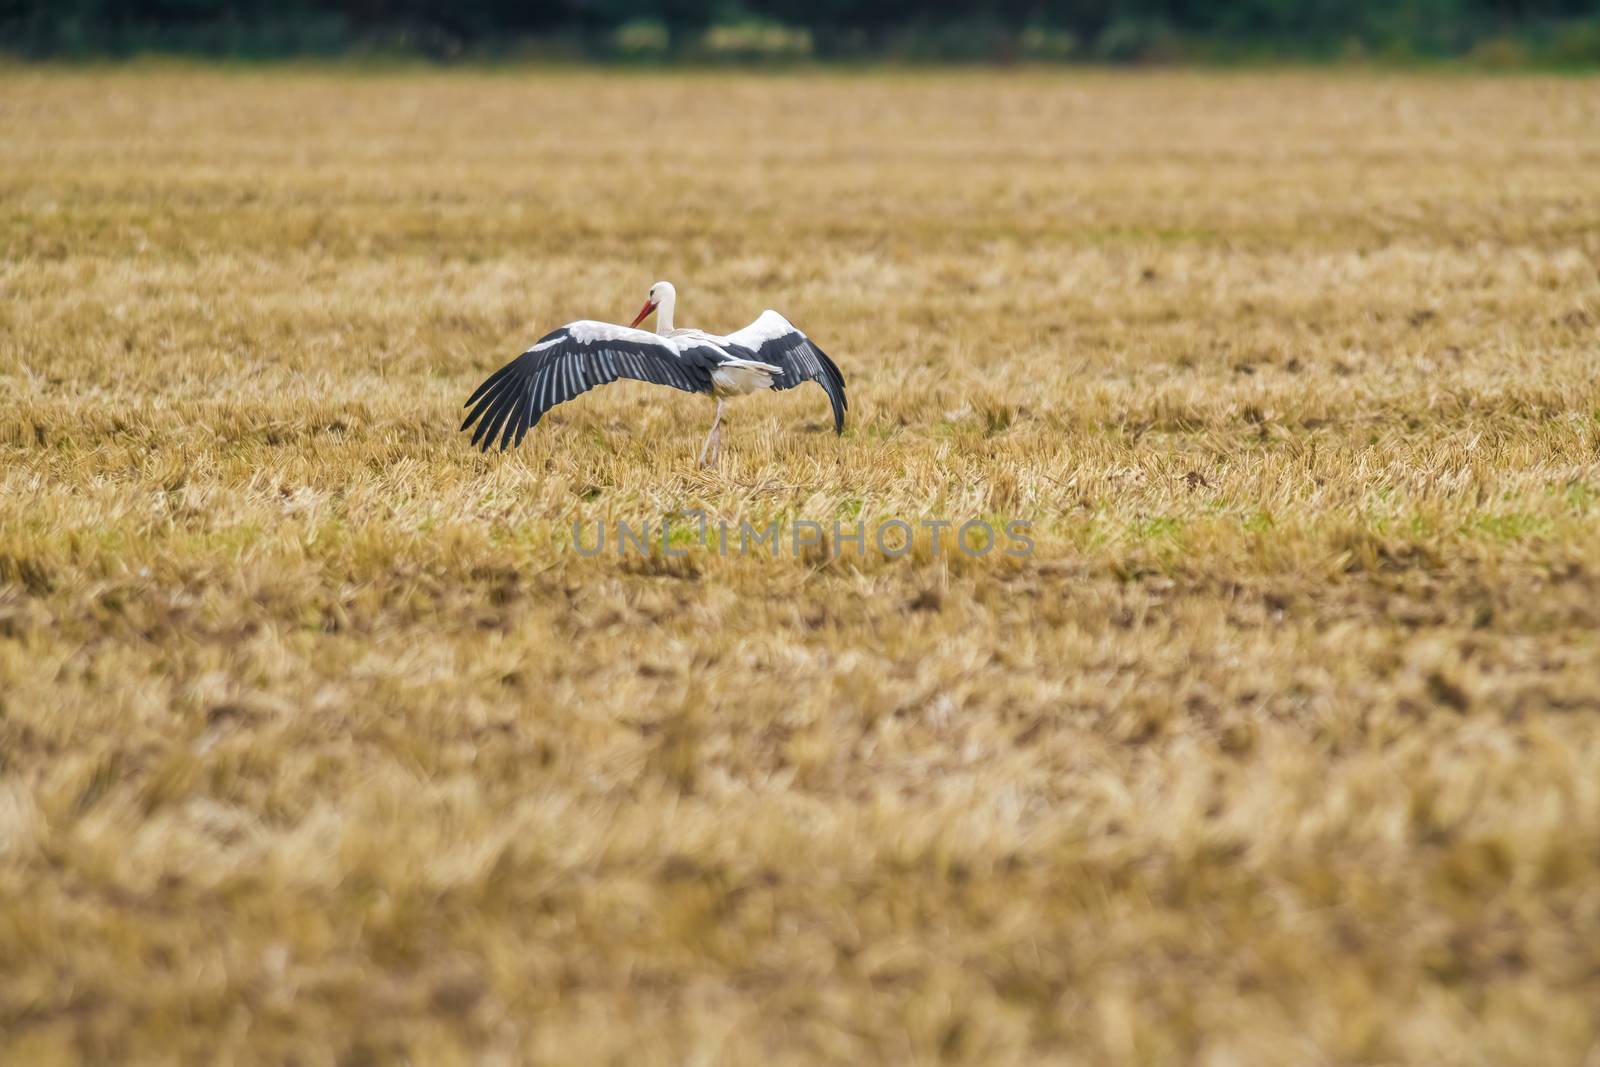 a great young bird on farm field in the nature